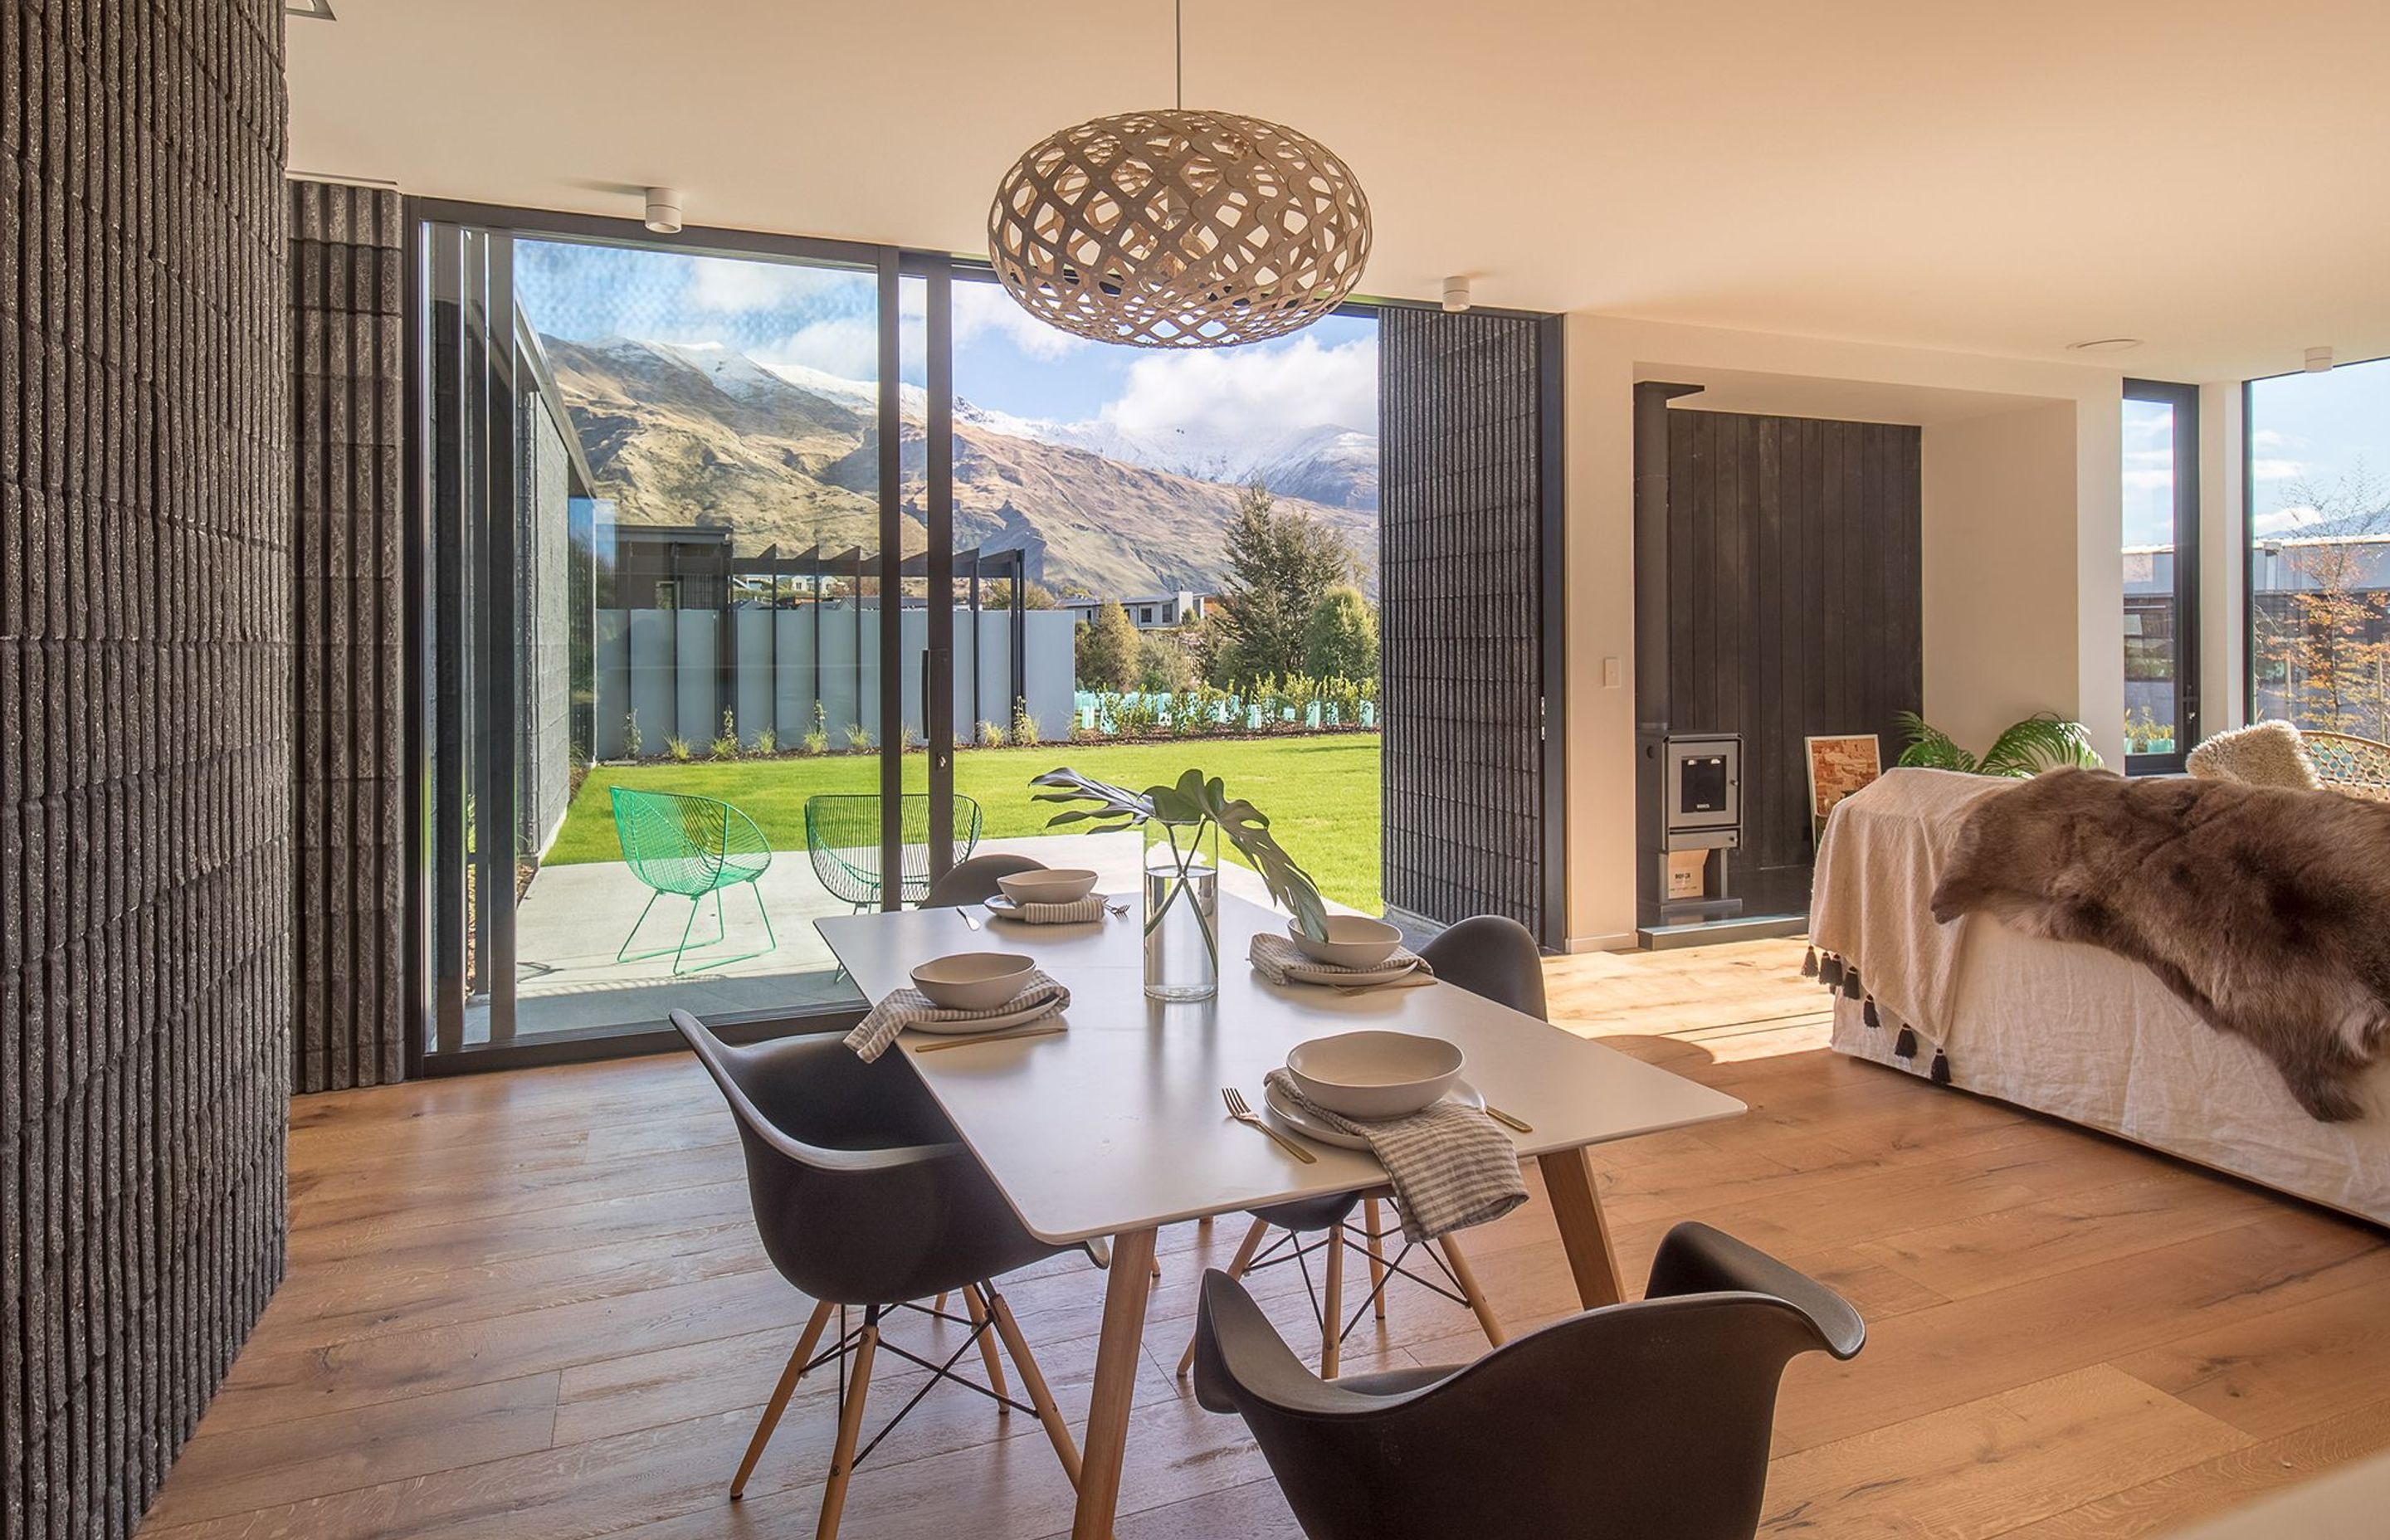 The mountain view from the dining and kitchen area in one of the standalone houses.